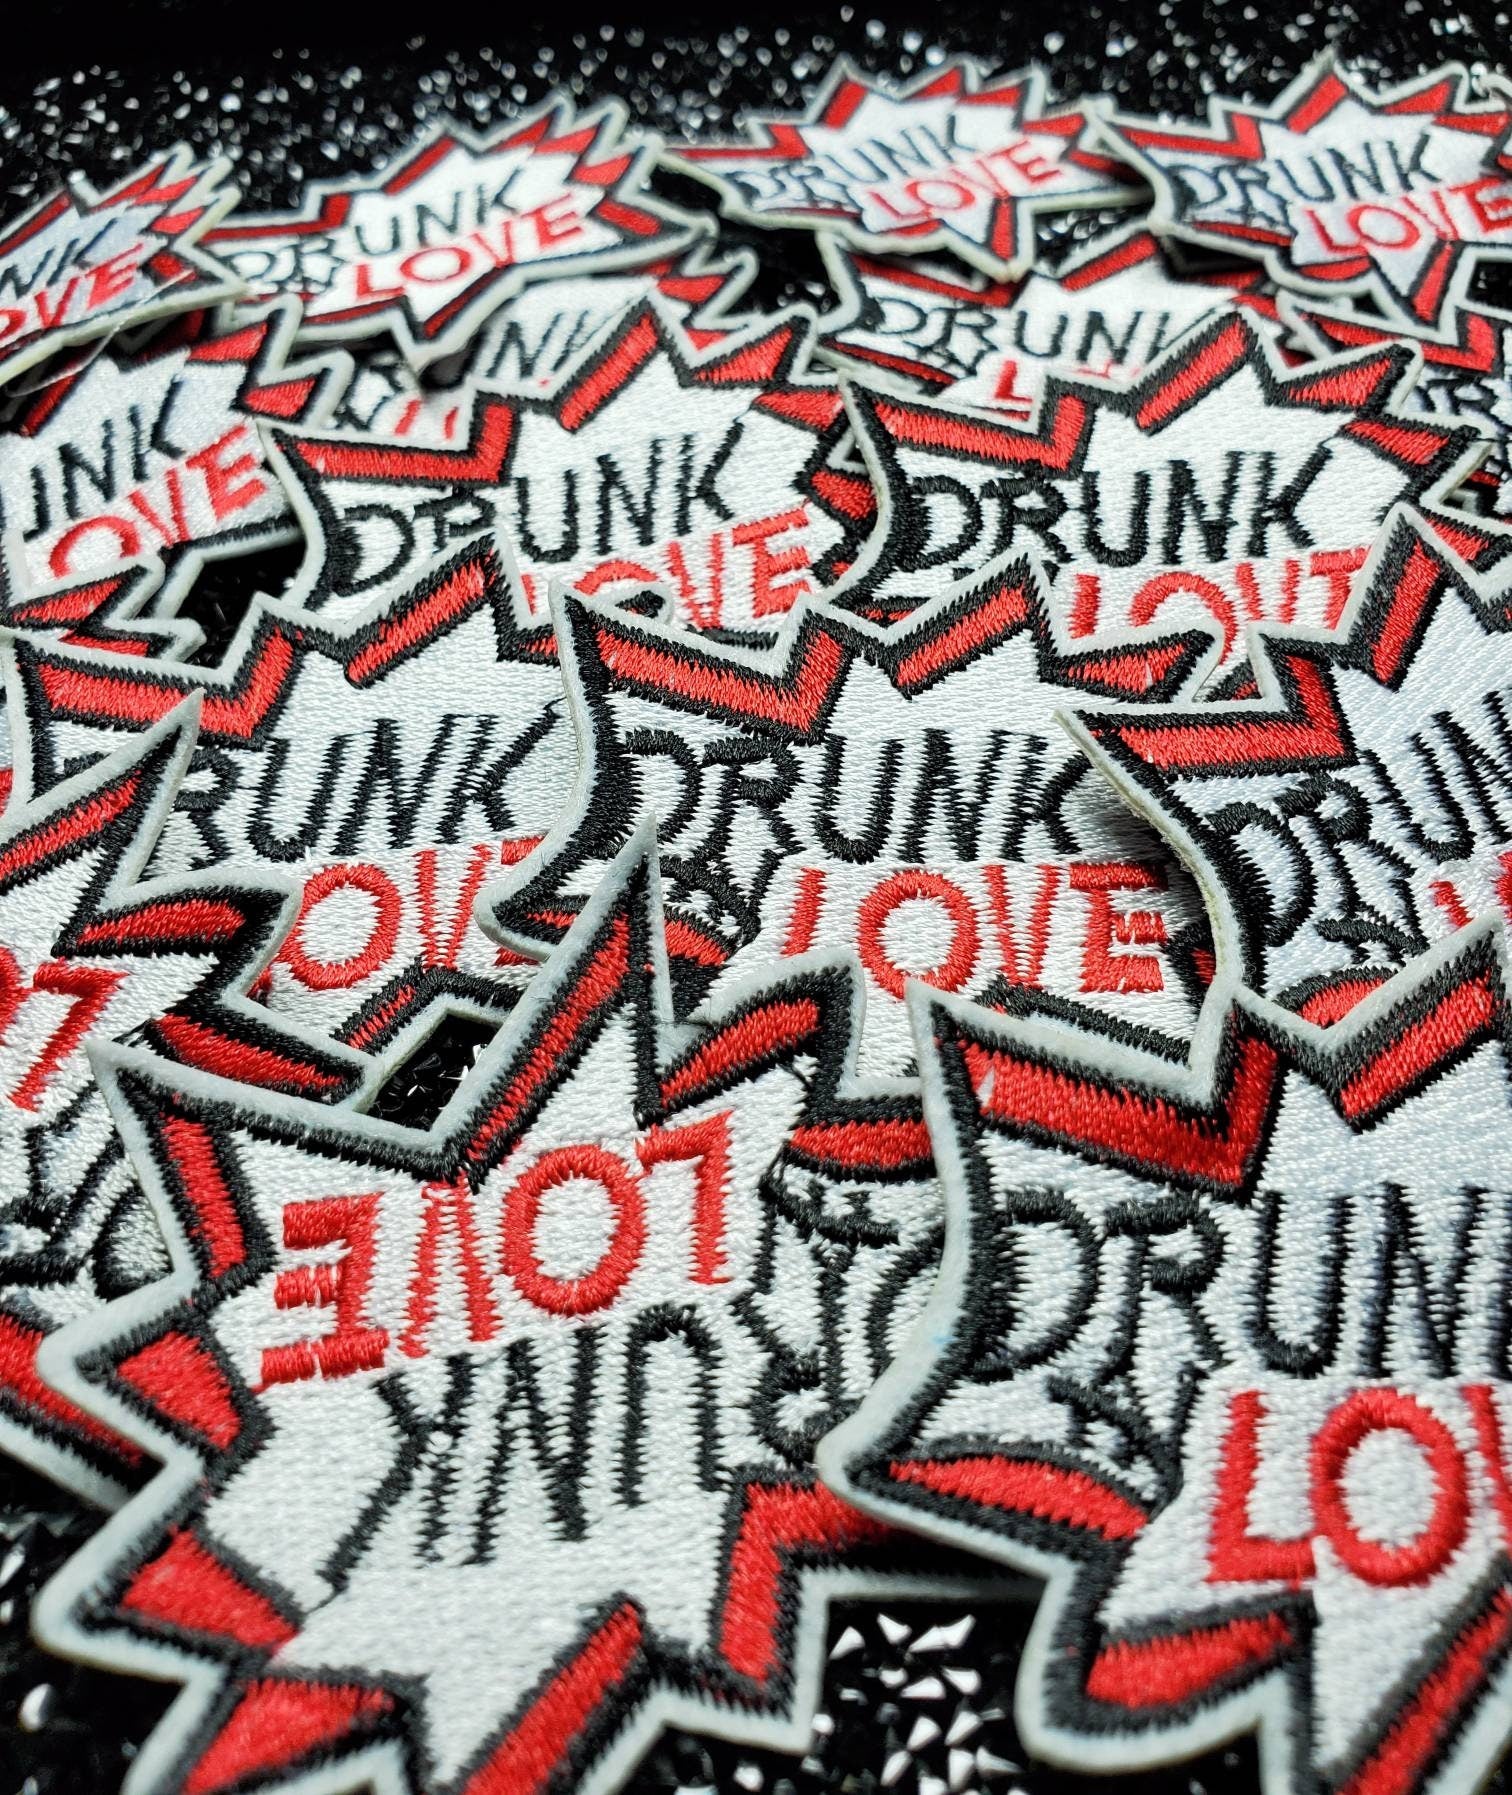 Starburst, "Drunk N Love" Patch, 3-inch, Iron or Sew on Embroidered Patch;Popular patches, Patches for Jackets; Red, White & Black Applique